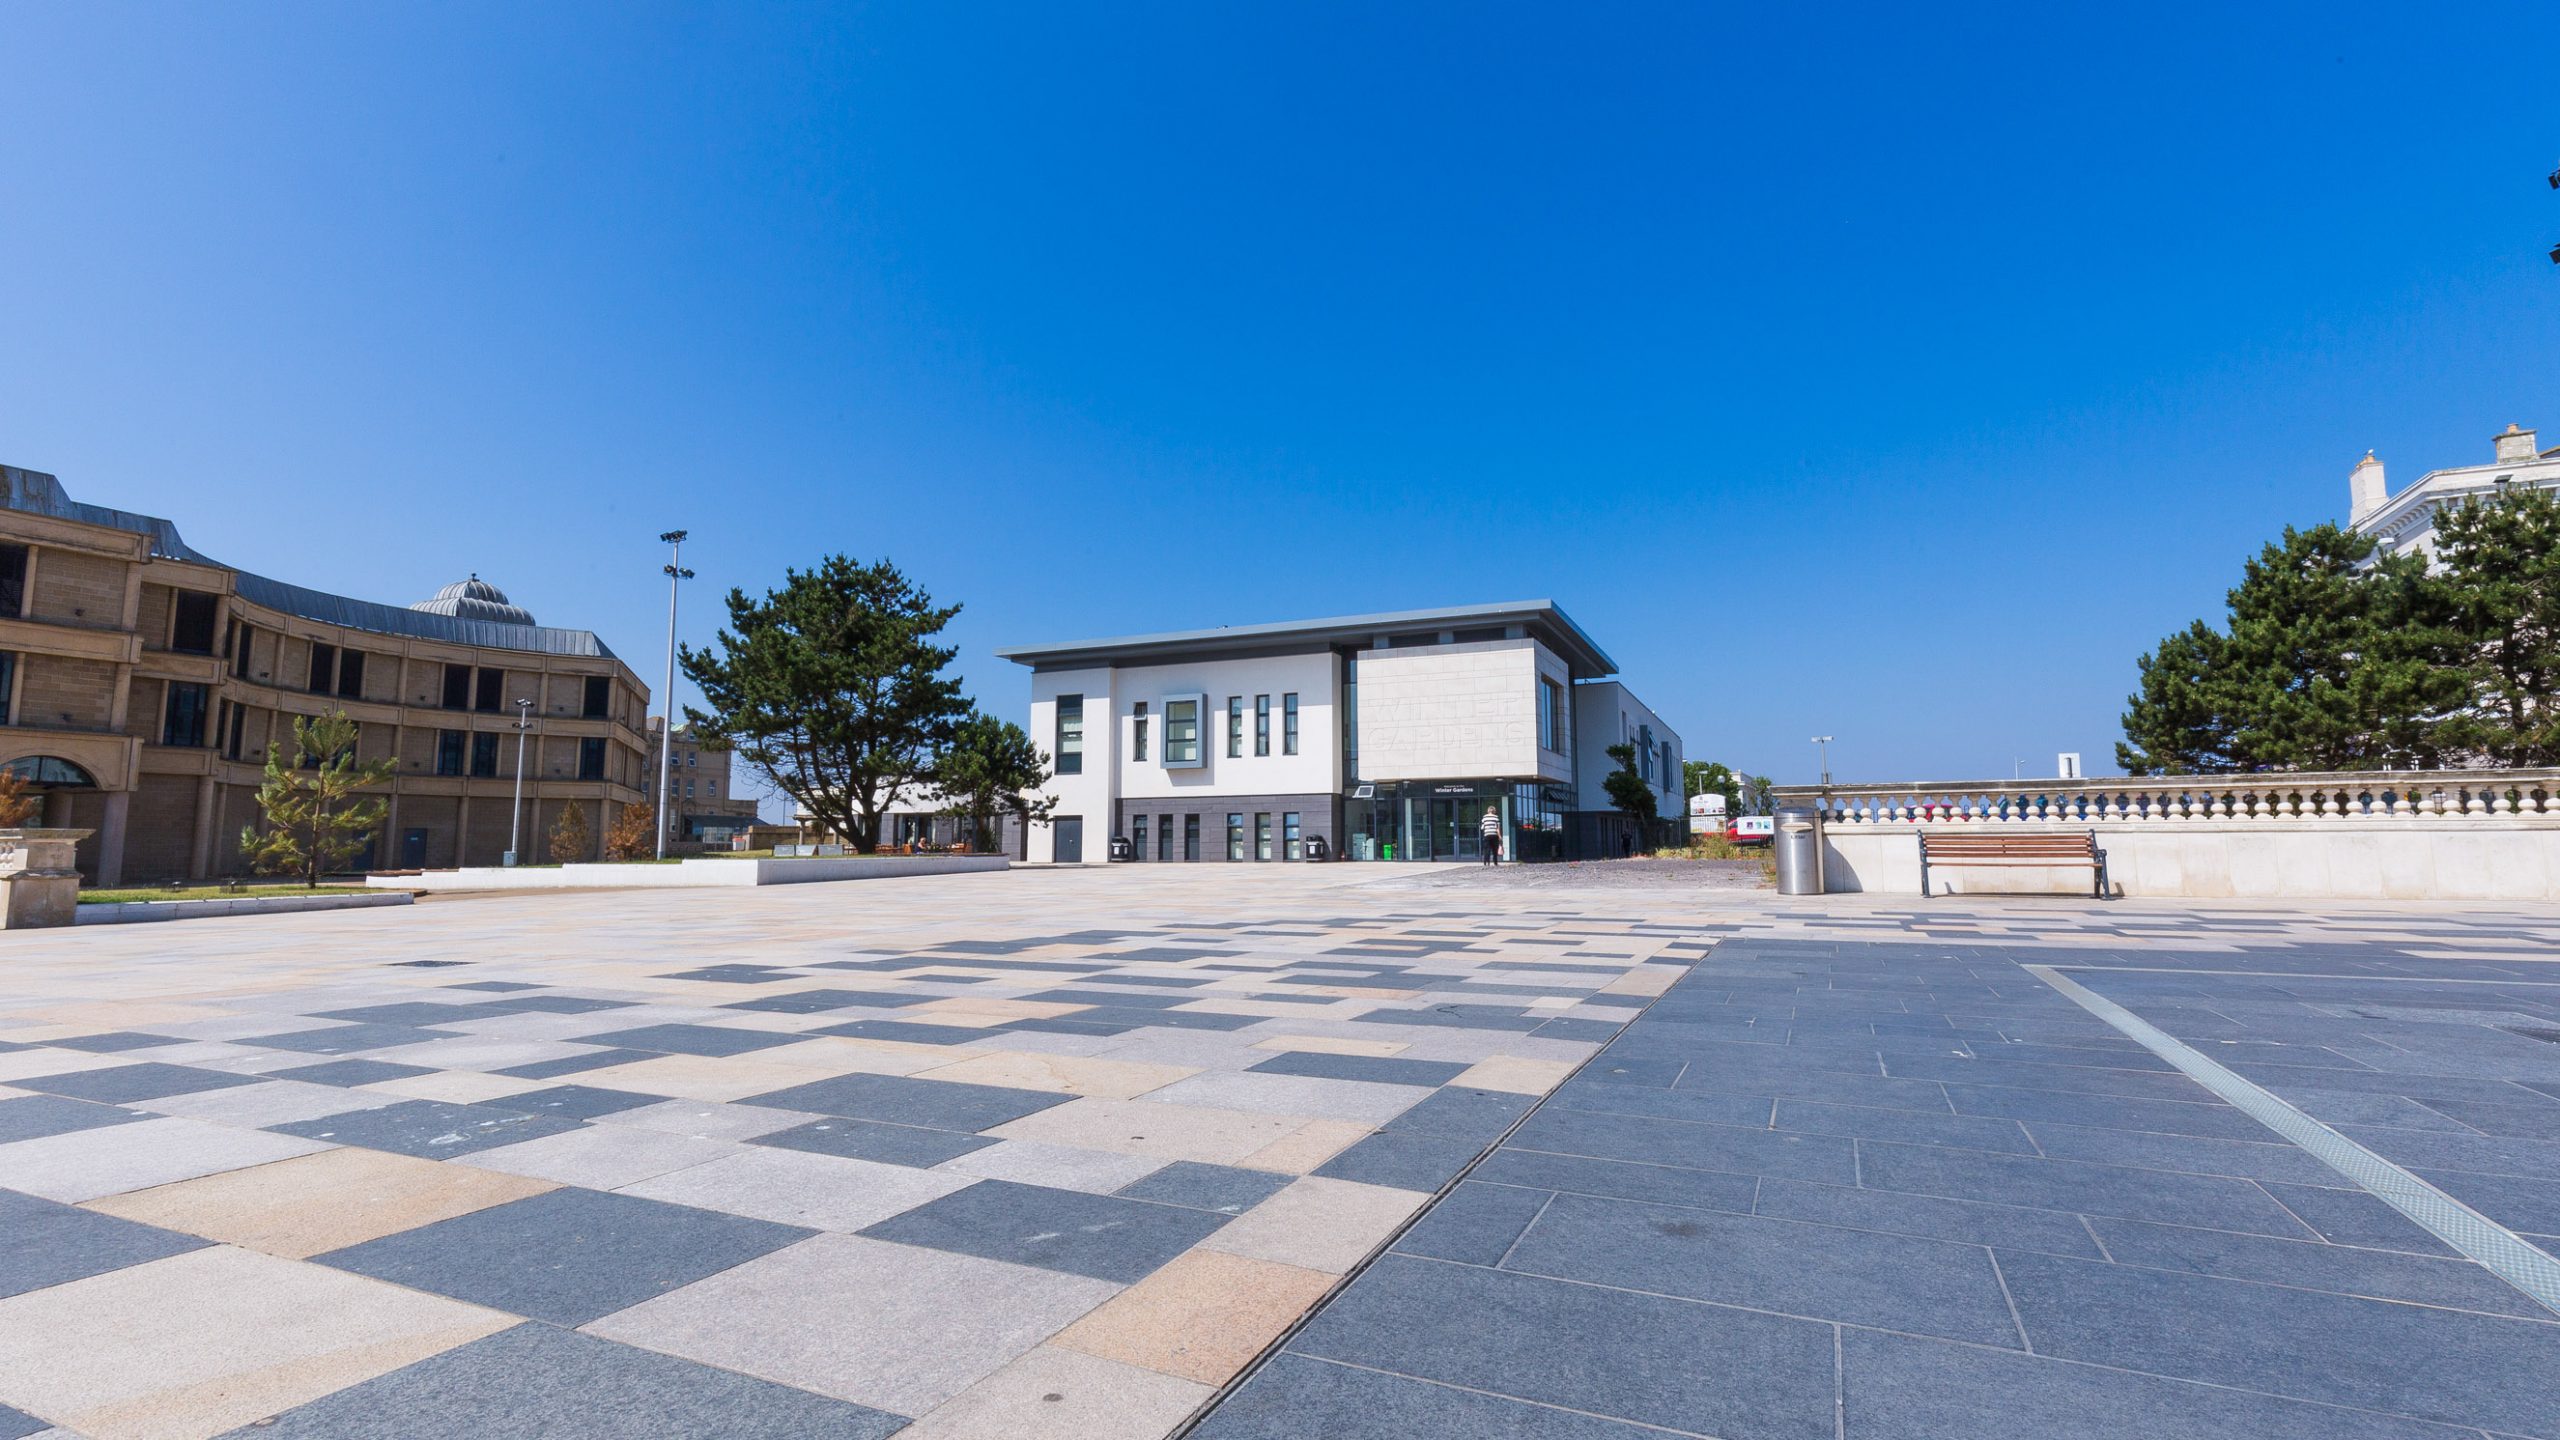 ucw winter gardens campus with fountains offering degree courses in weston-super-mare